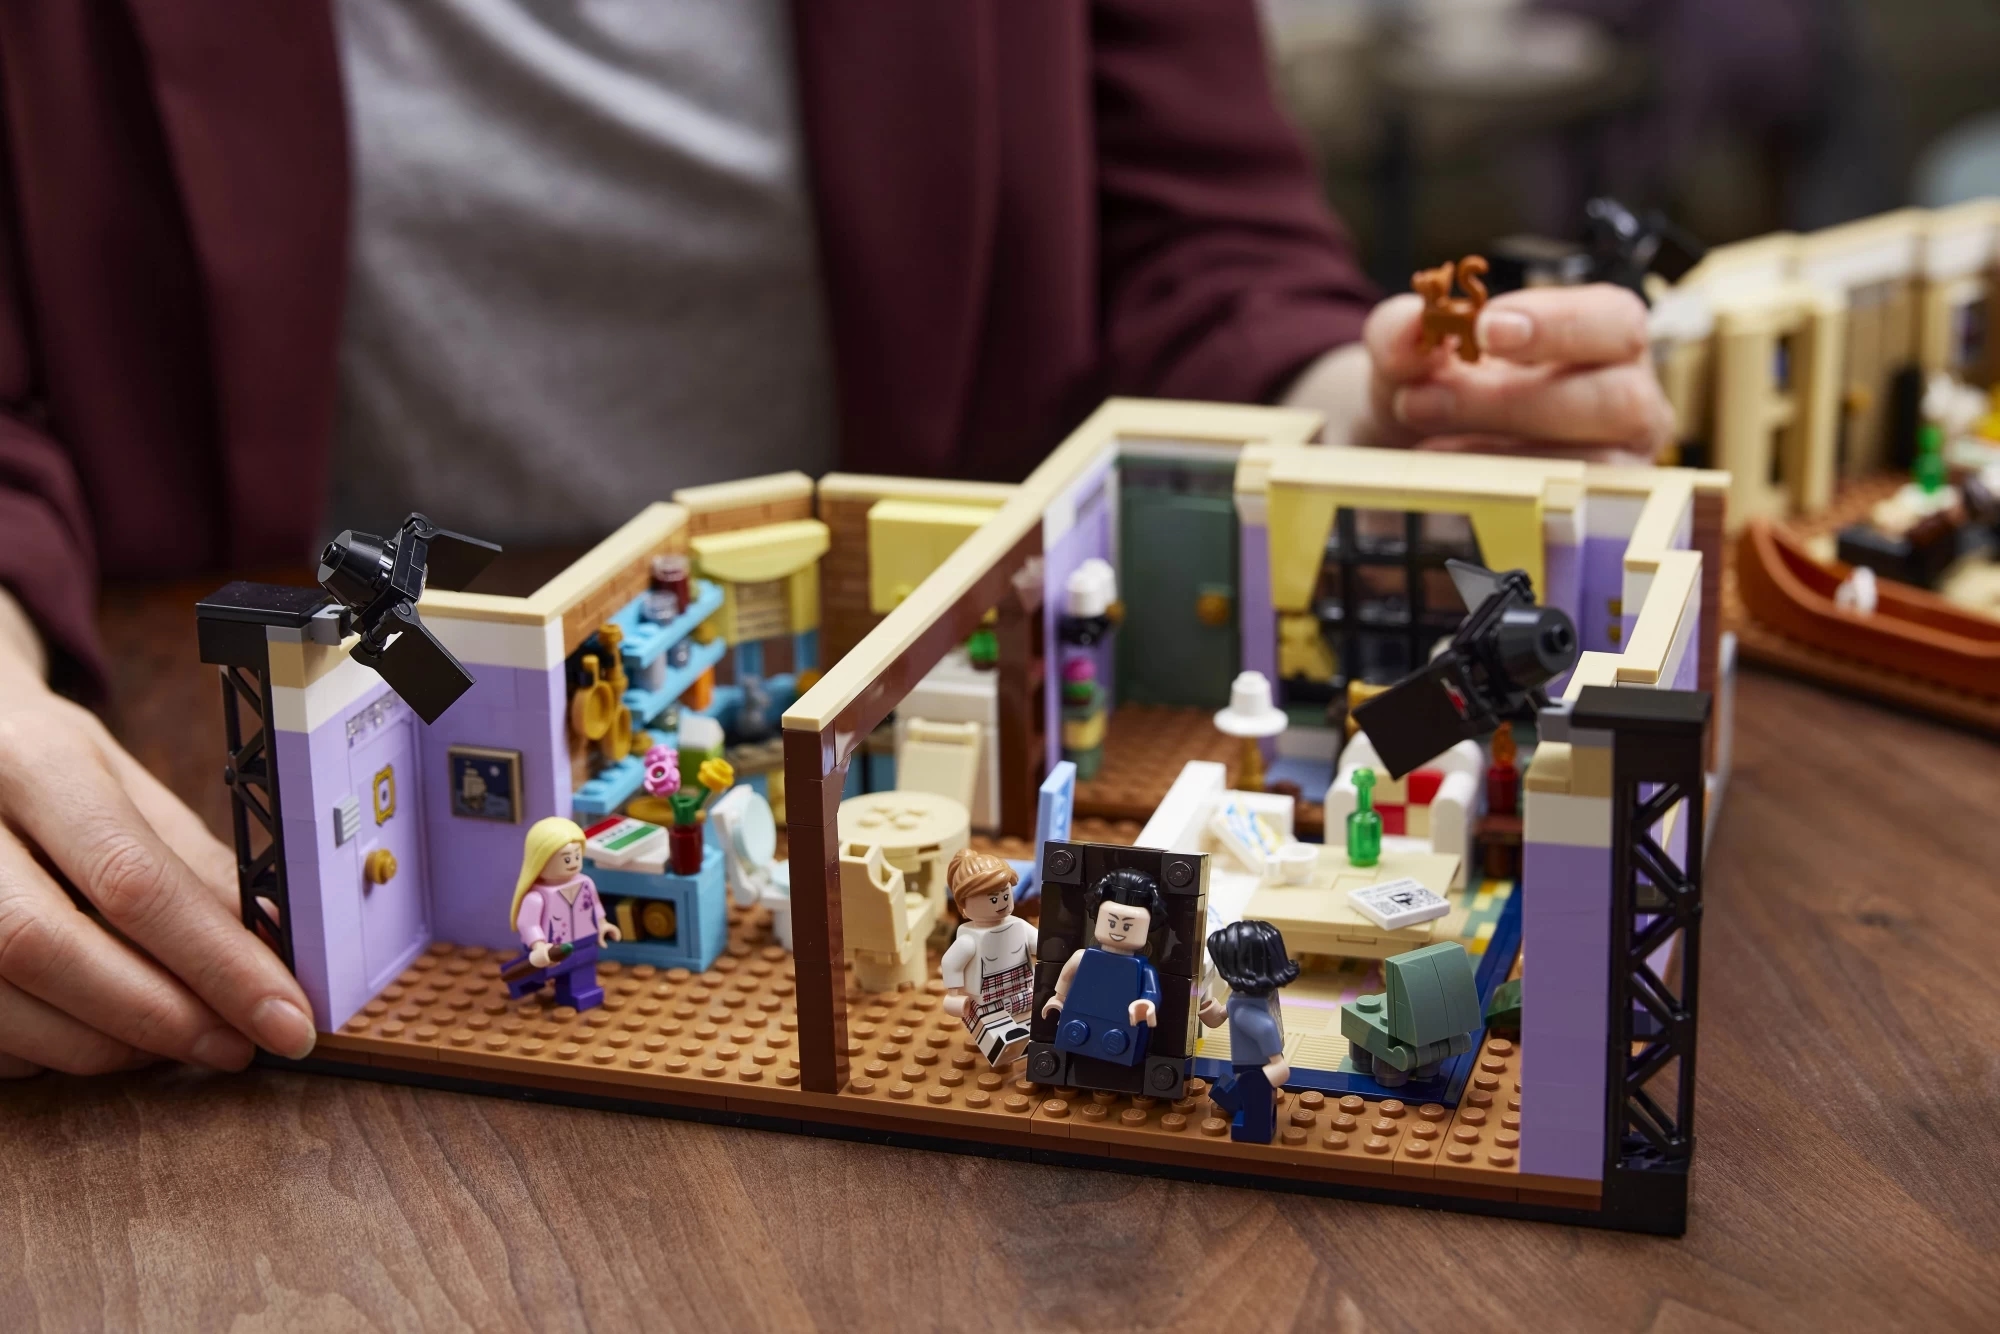 LEGO has released a 2,048-piece set based on the "Friends" series